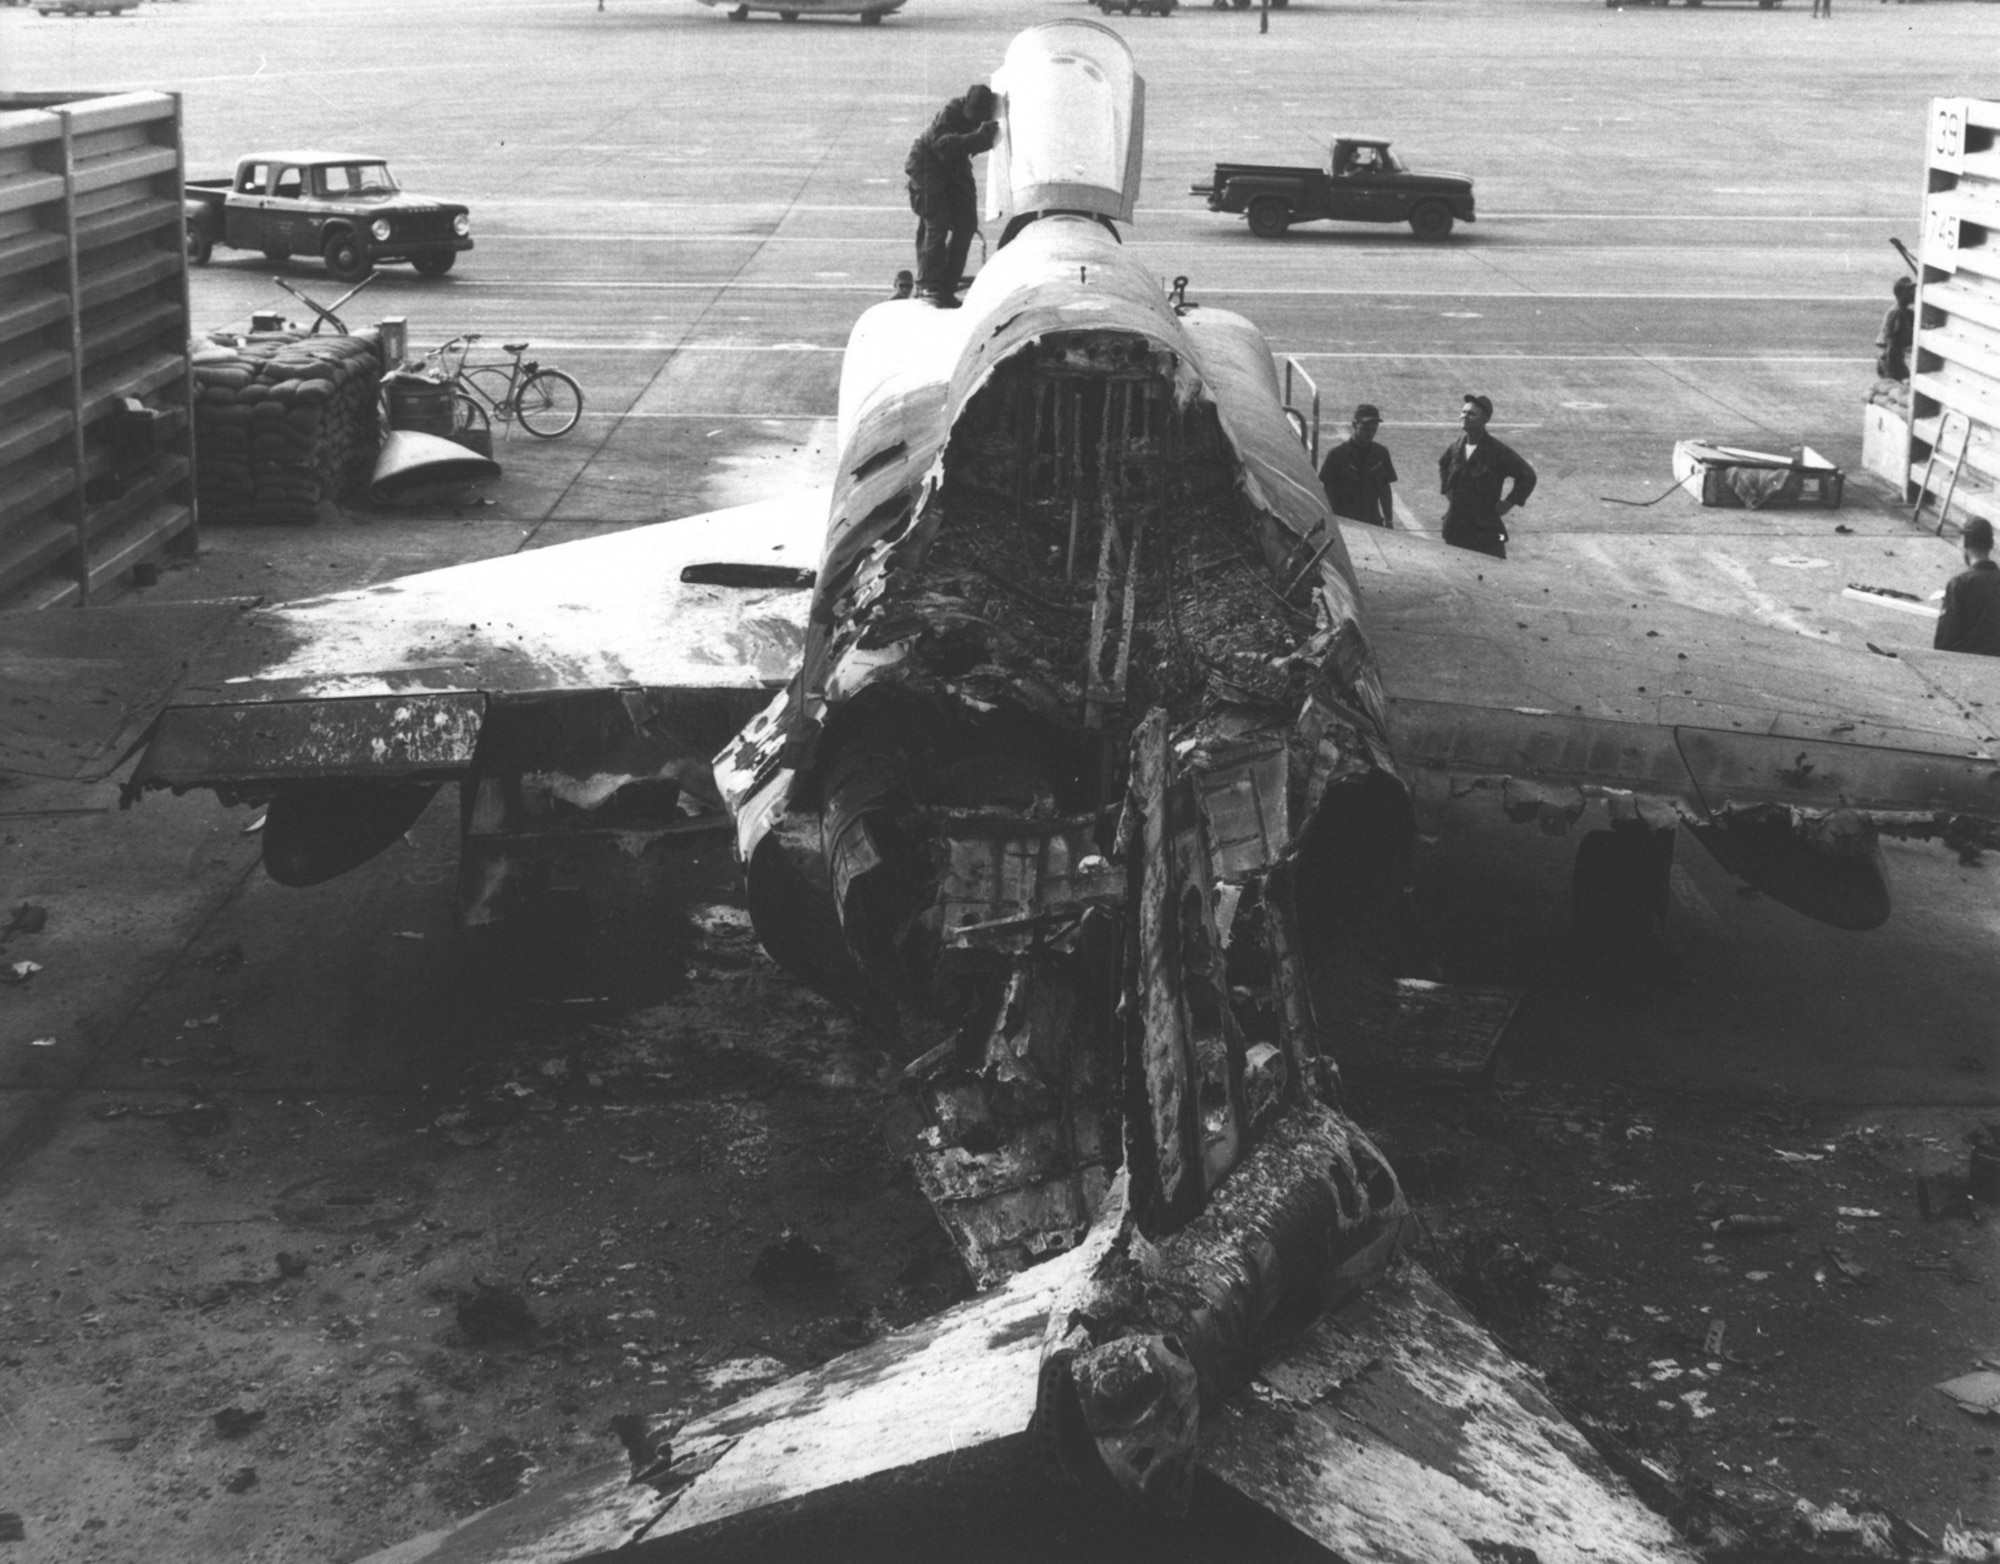 RF-4C Phantom II destroyed during the enemy attack against Tan Son Nhut during the Tet Offensive. (U.S. Air Force photo).